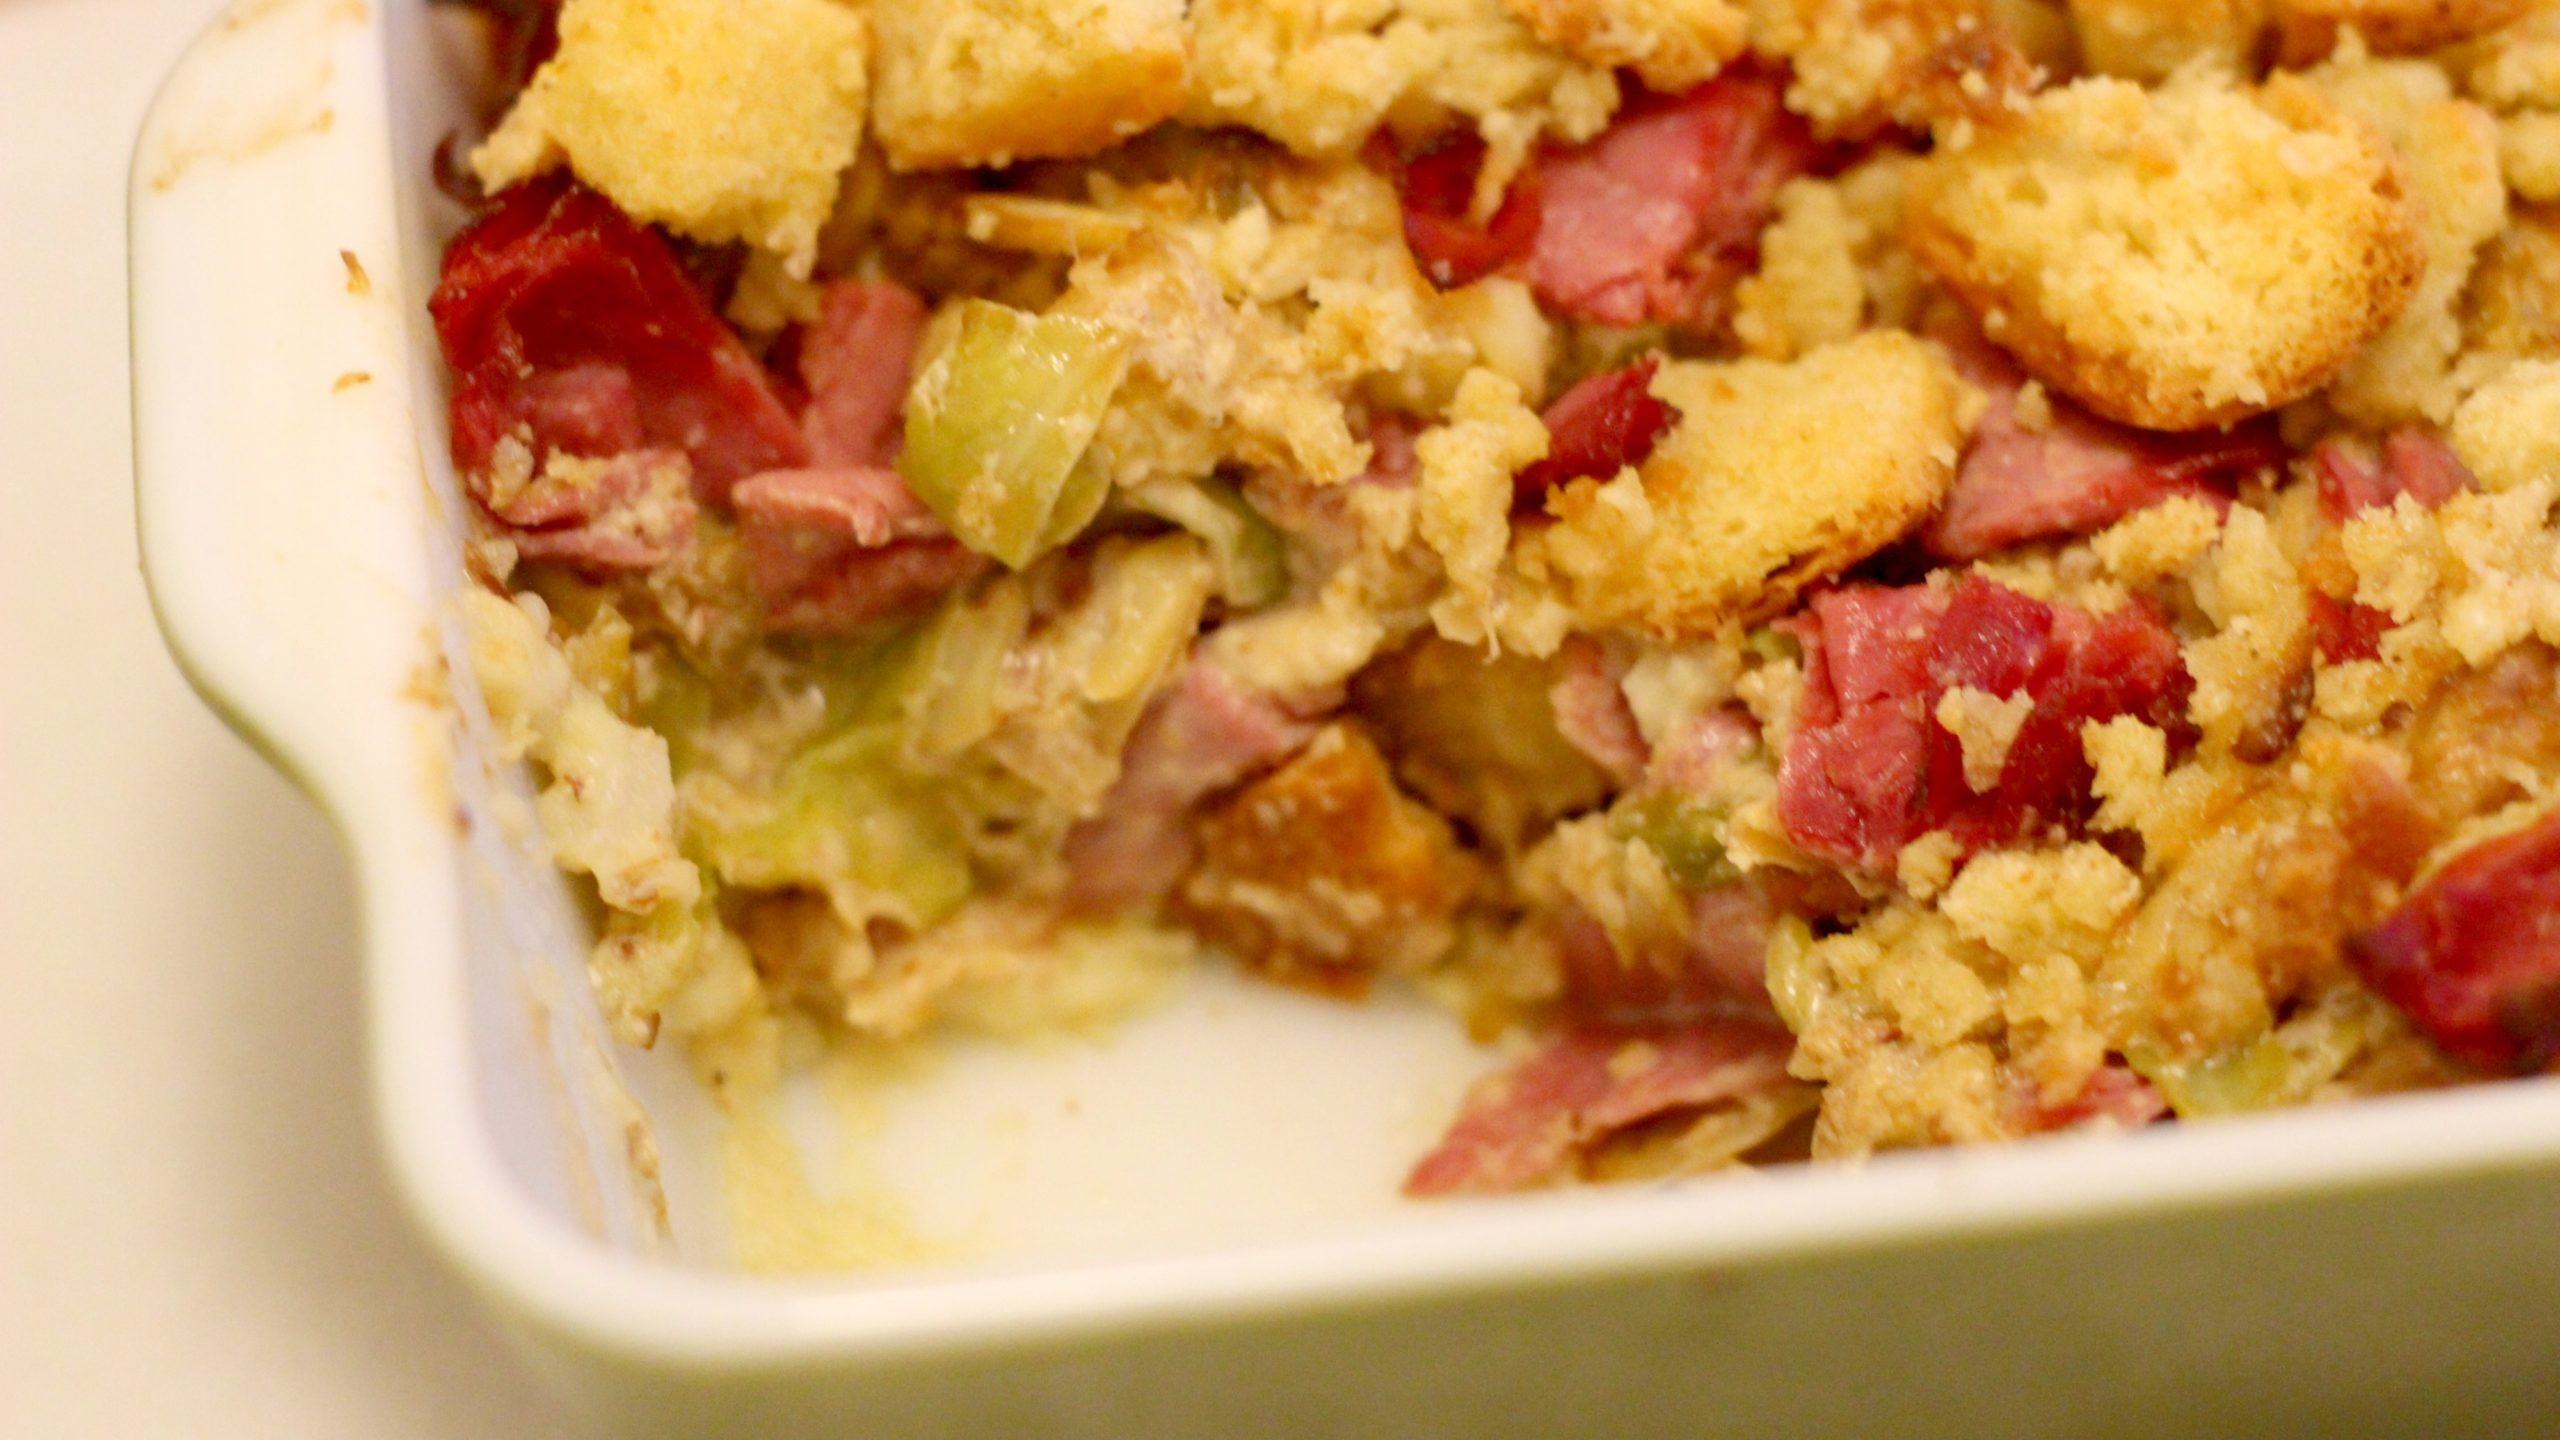 Eat This Corned Beef Casserole To Soak Up Your St Patrick’s Day Libations